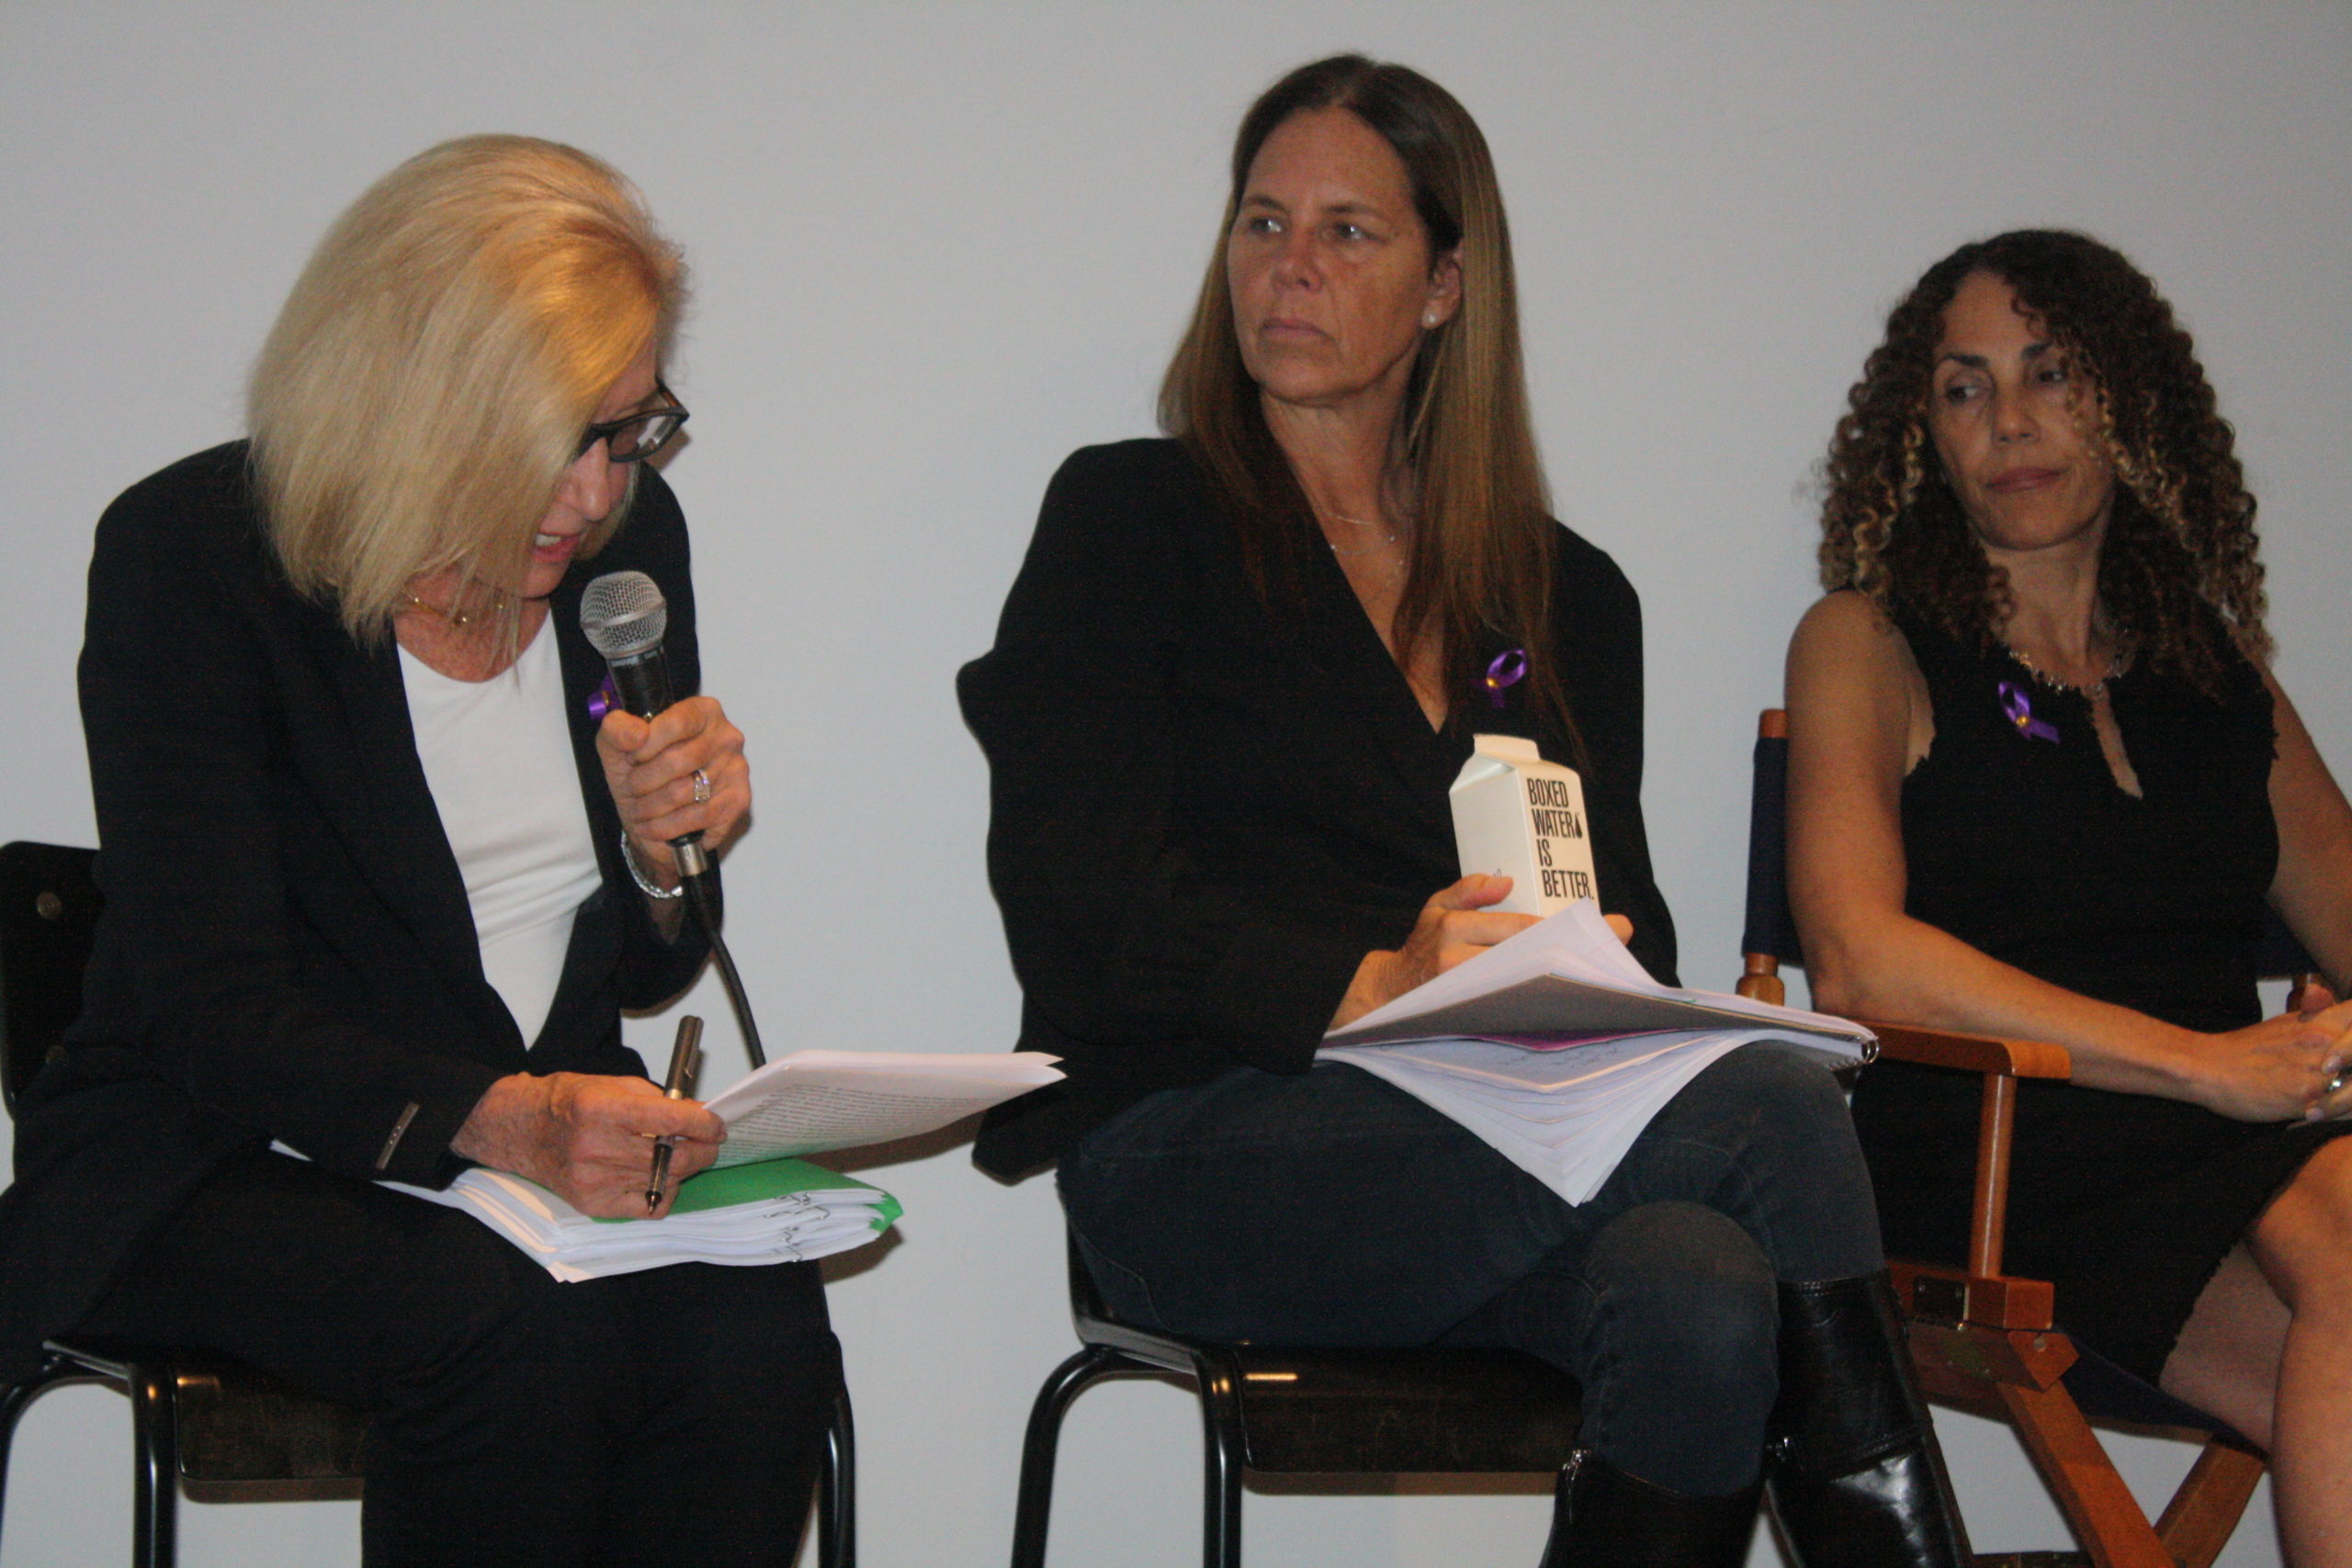 From left, panel moderator Diana Diamond, advocate and survivor Nicole Behrens, and OLA executive director Minerva Perez discussing the issue of domestic violence in the community at a panel discussion at the Sag Harbor Cinema on Sunday evening.